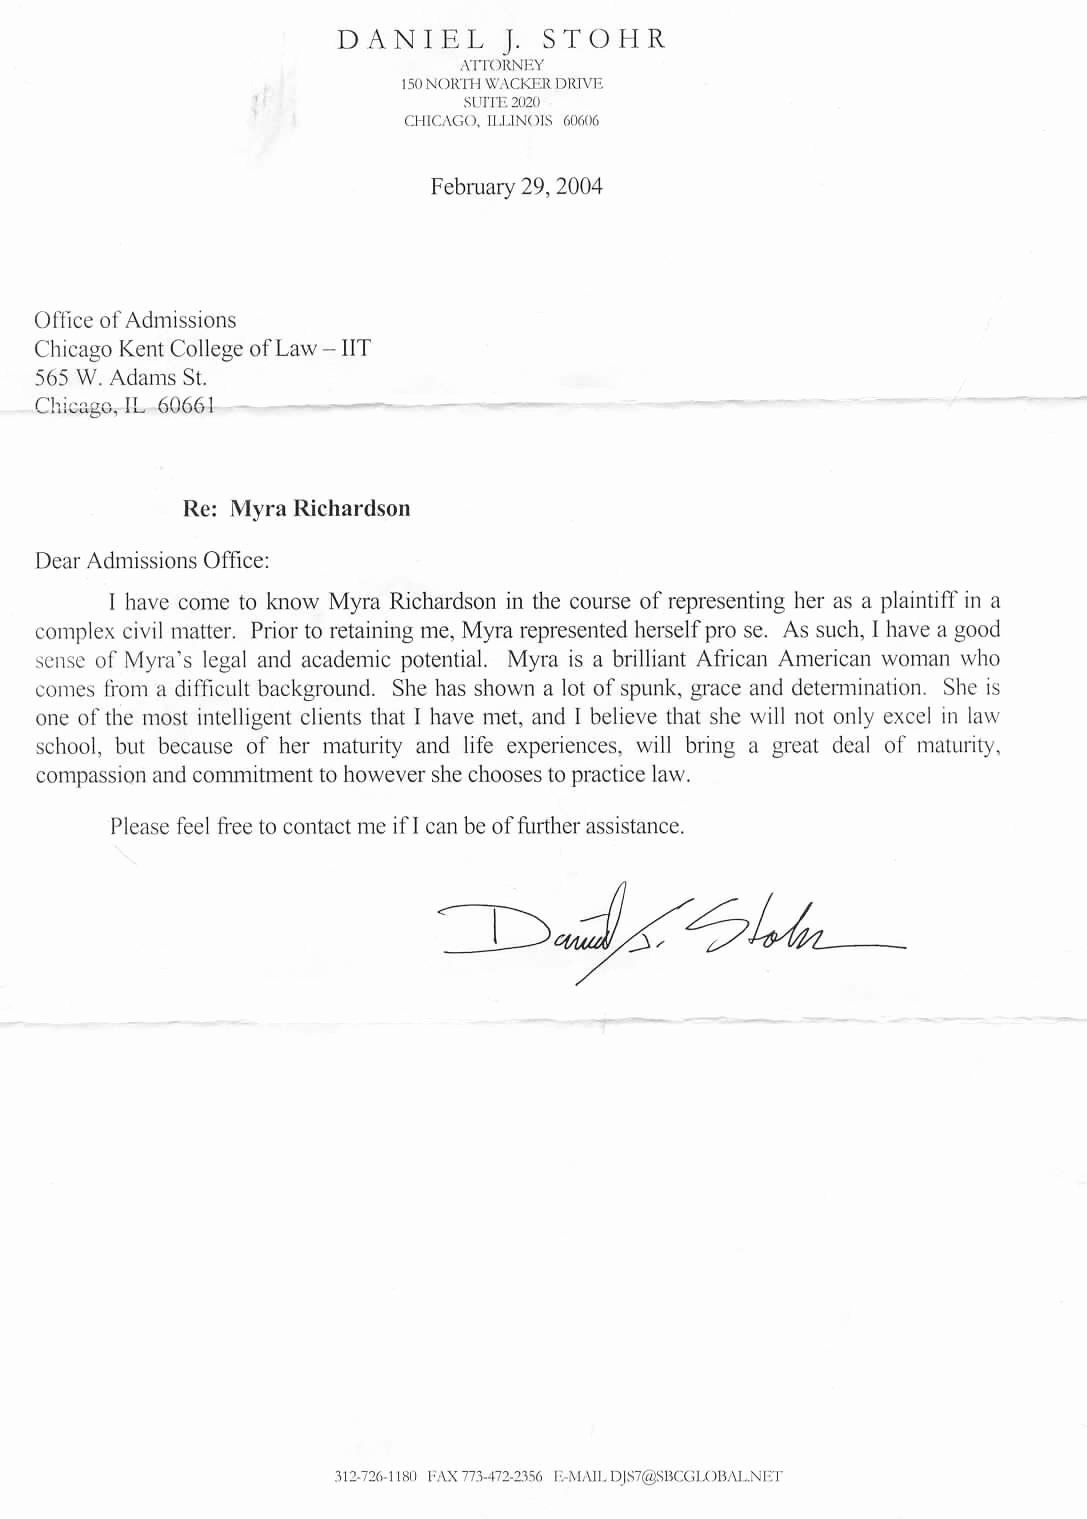 Law School Recommendation Letter Sample Inspirational Corruption Exposed